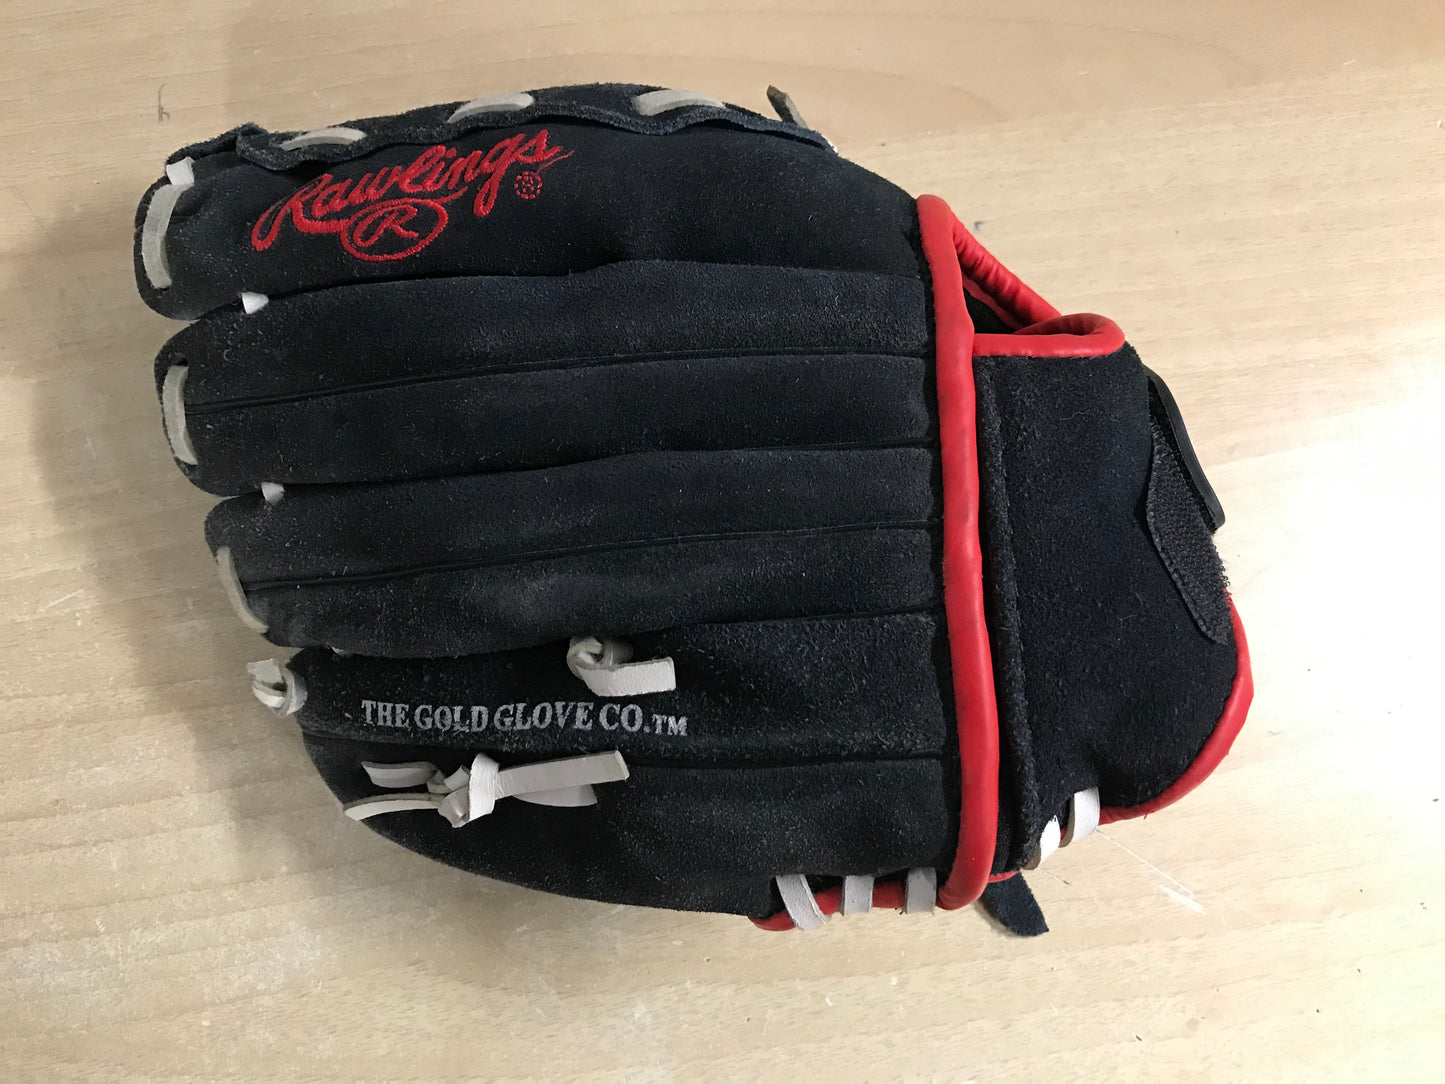 Baseball Glove Child Size 10.5 inch Rawlings Red Black Soft Leather Fits on Left Hand